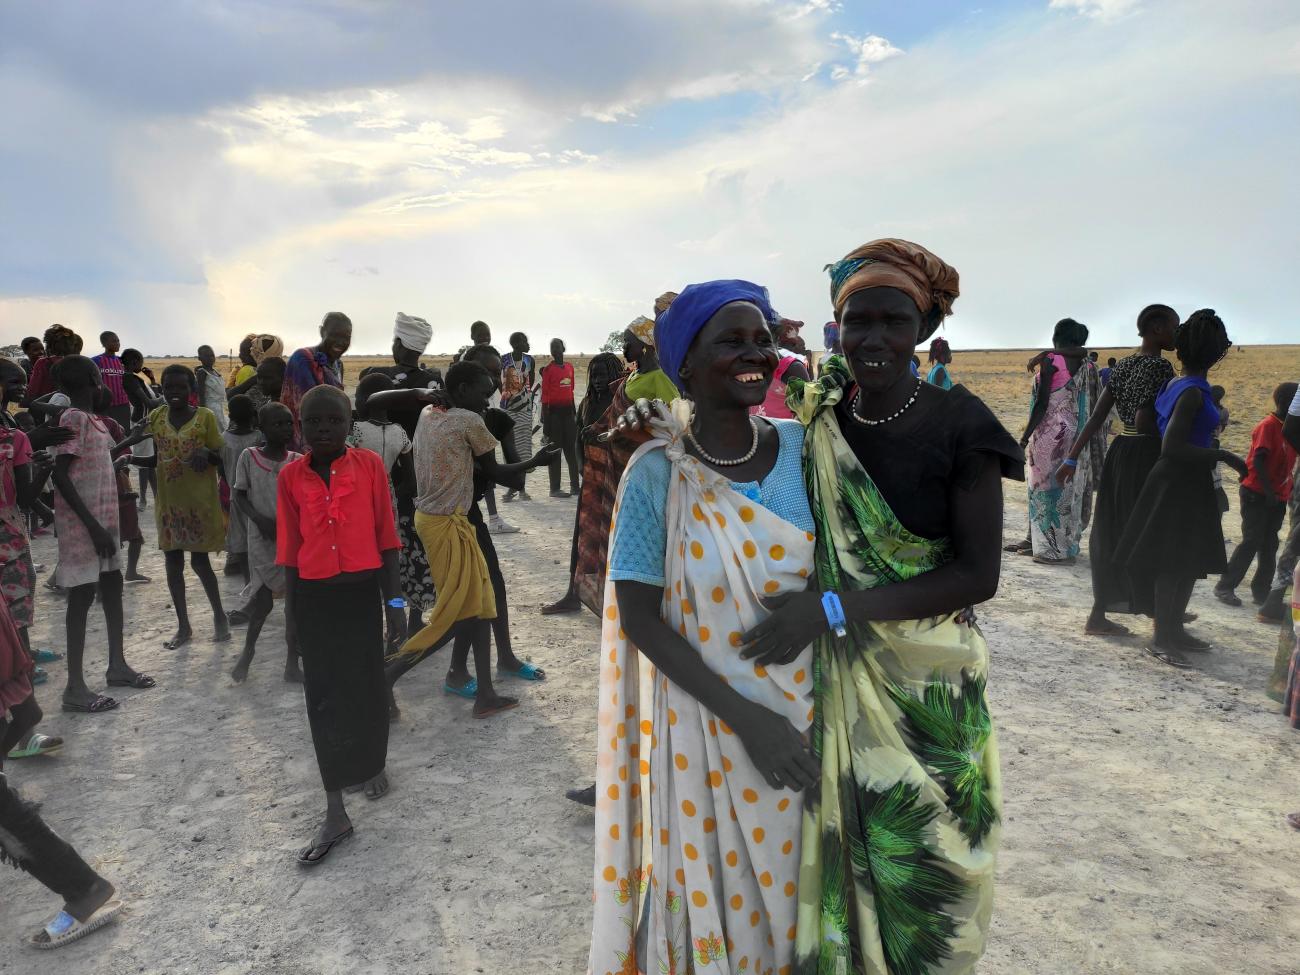 Reunited after years of displacement. South Sudanese internally displaced persons return home with the support of humanitarian actors in April 2021